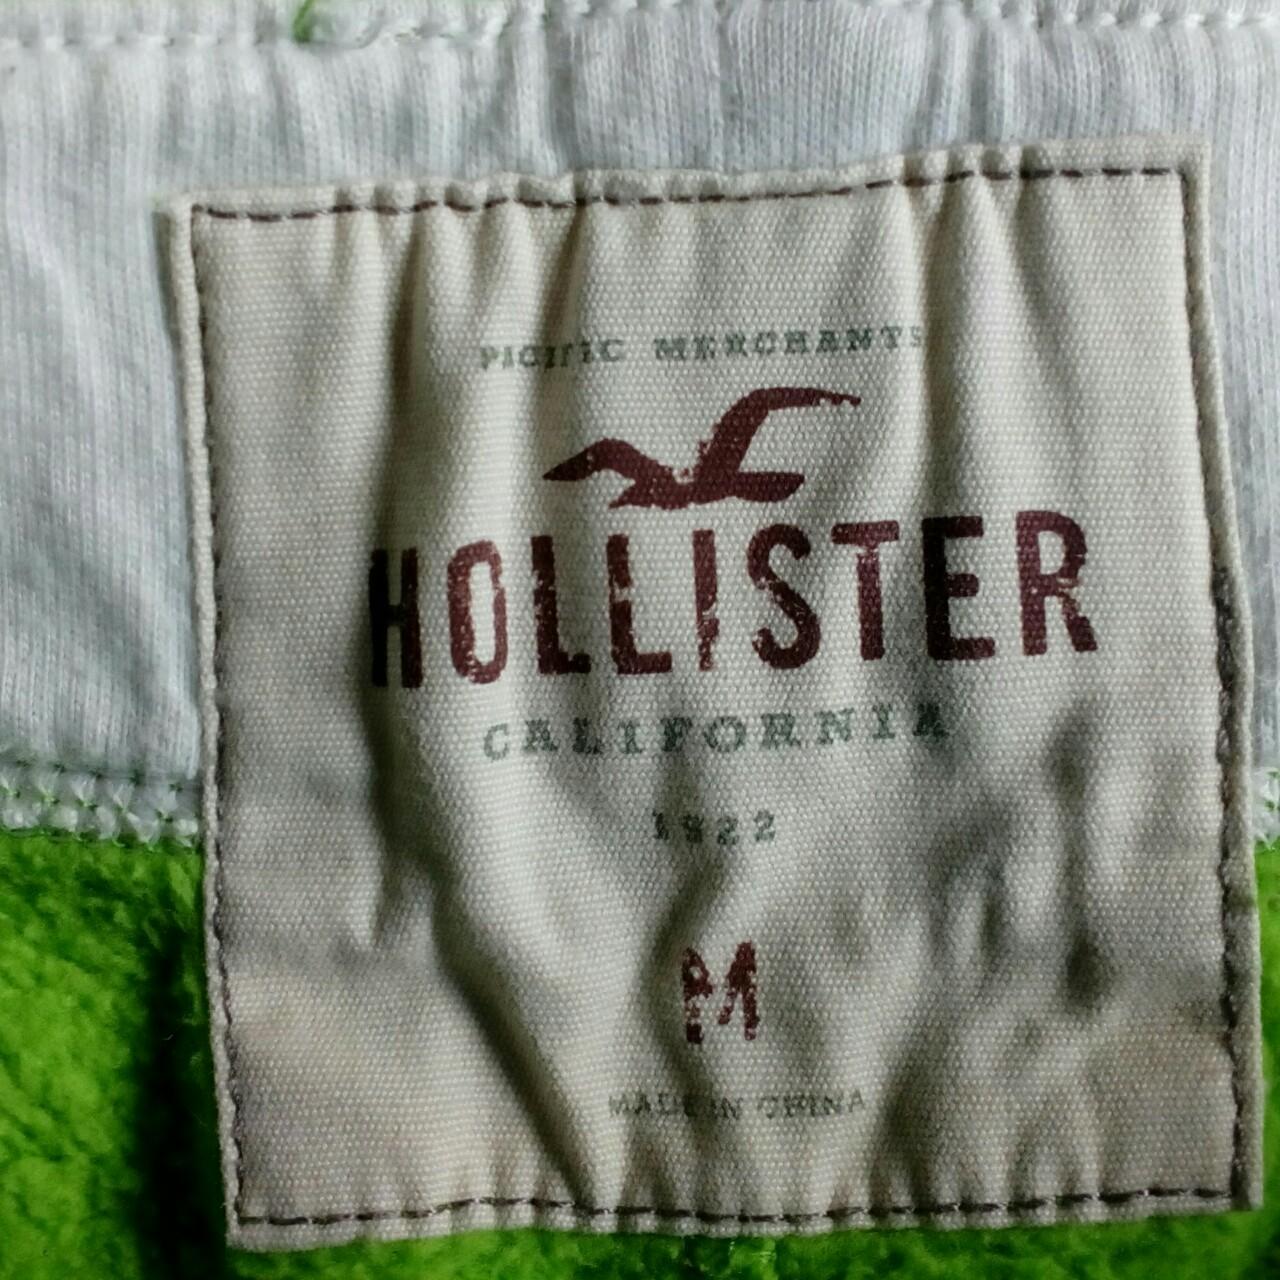 Green Hollister joggers. Thick and comfortable. From - Depop